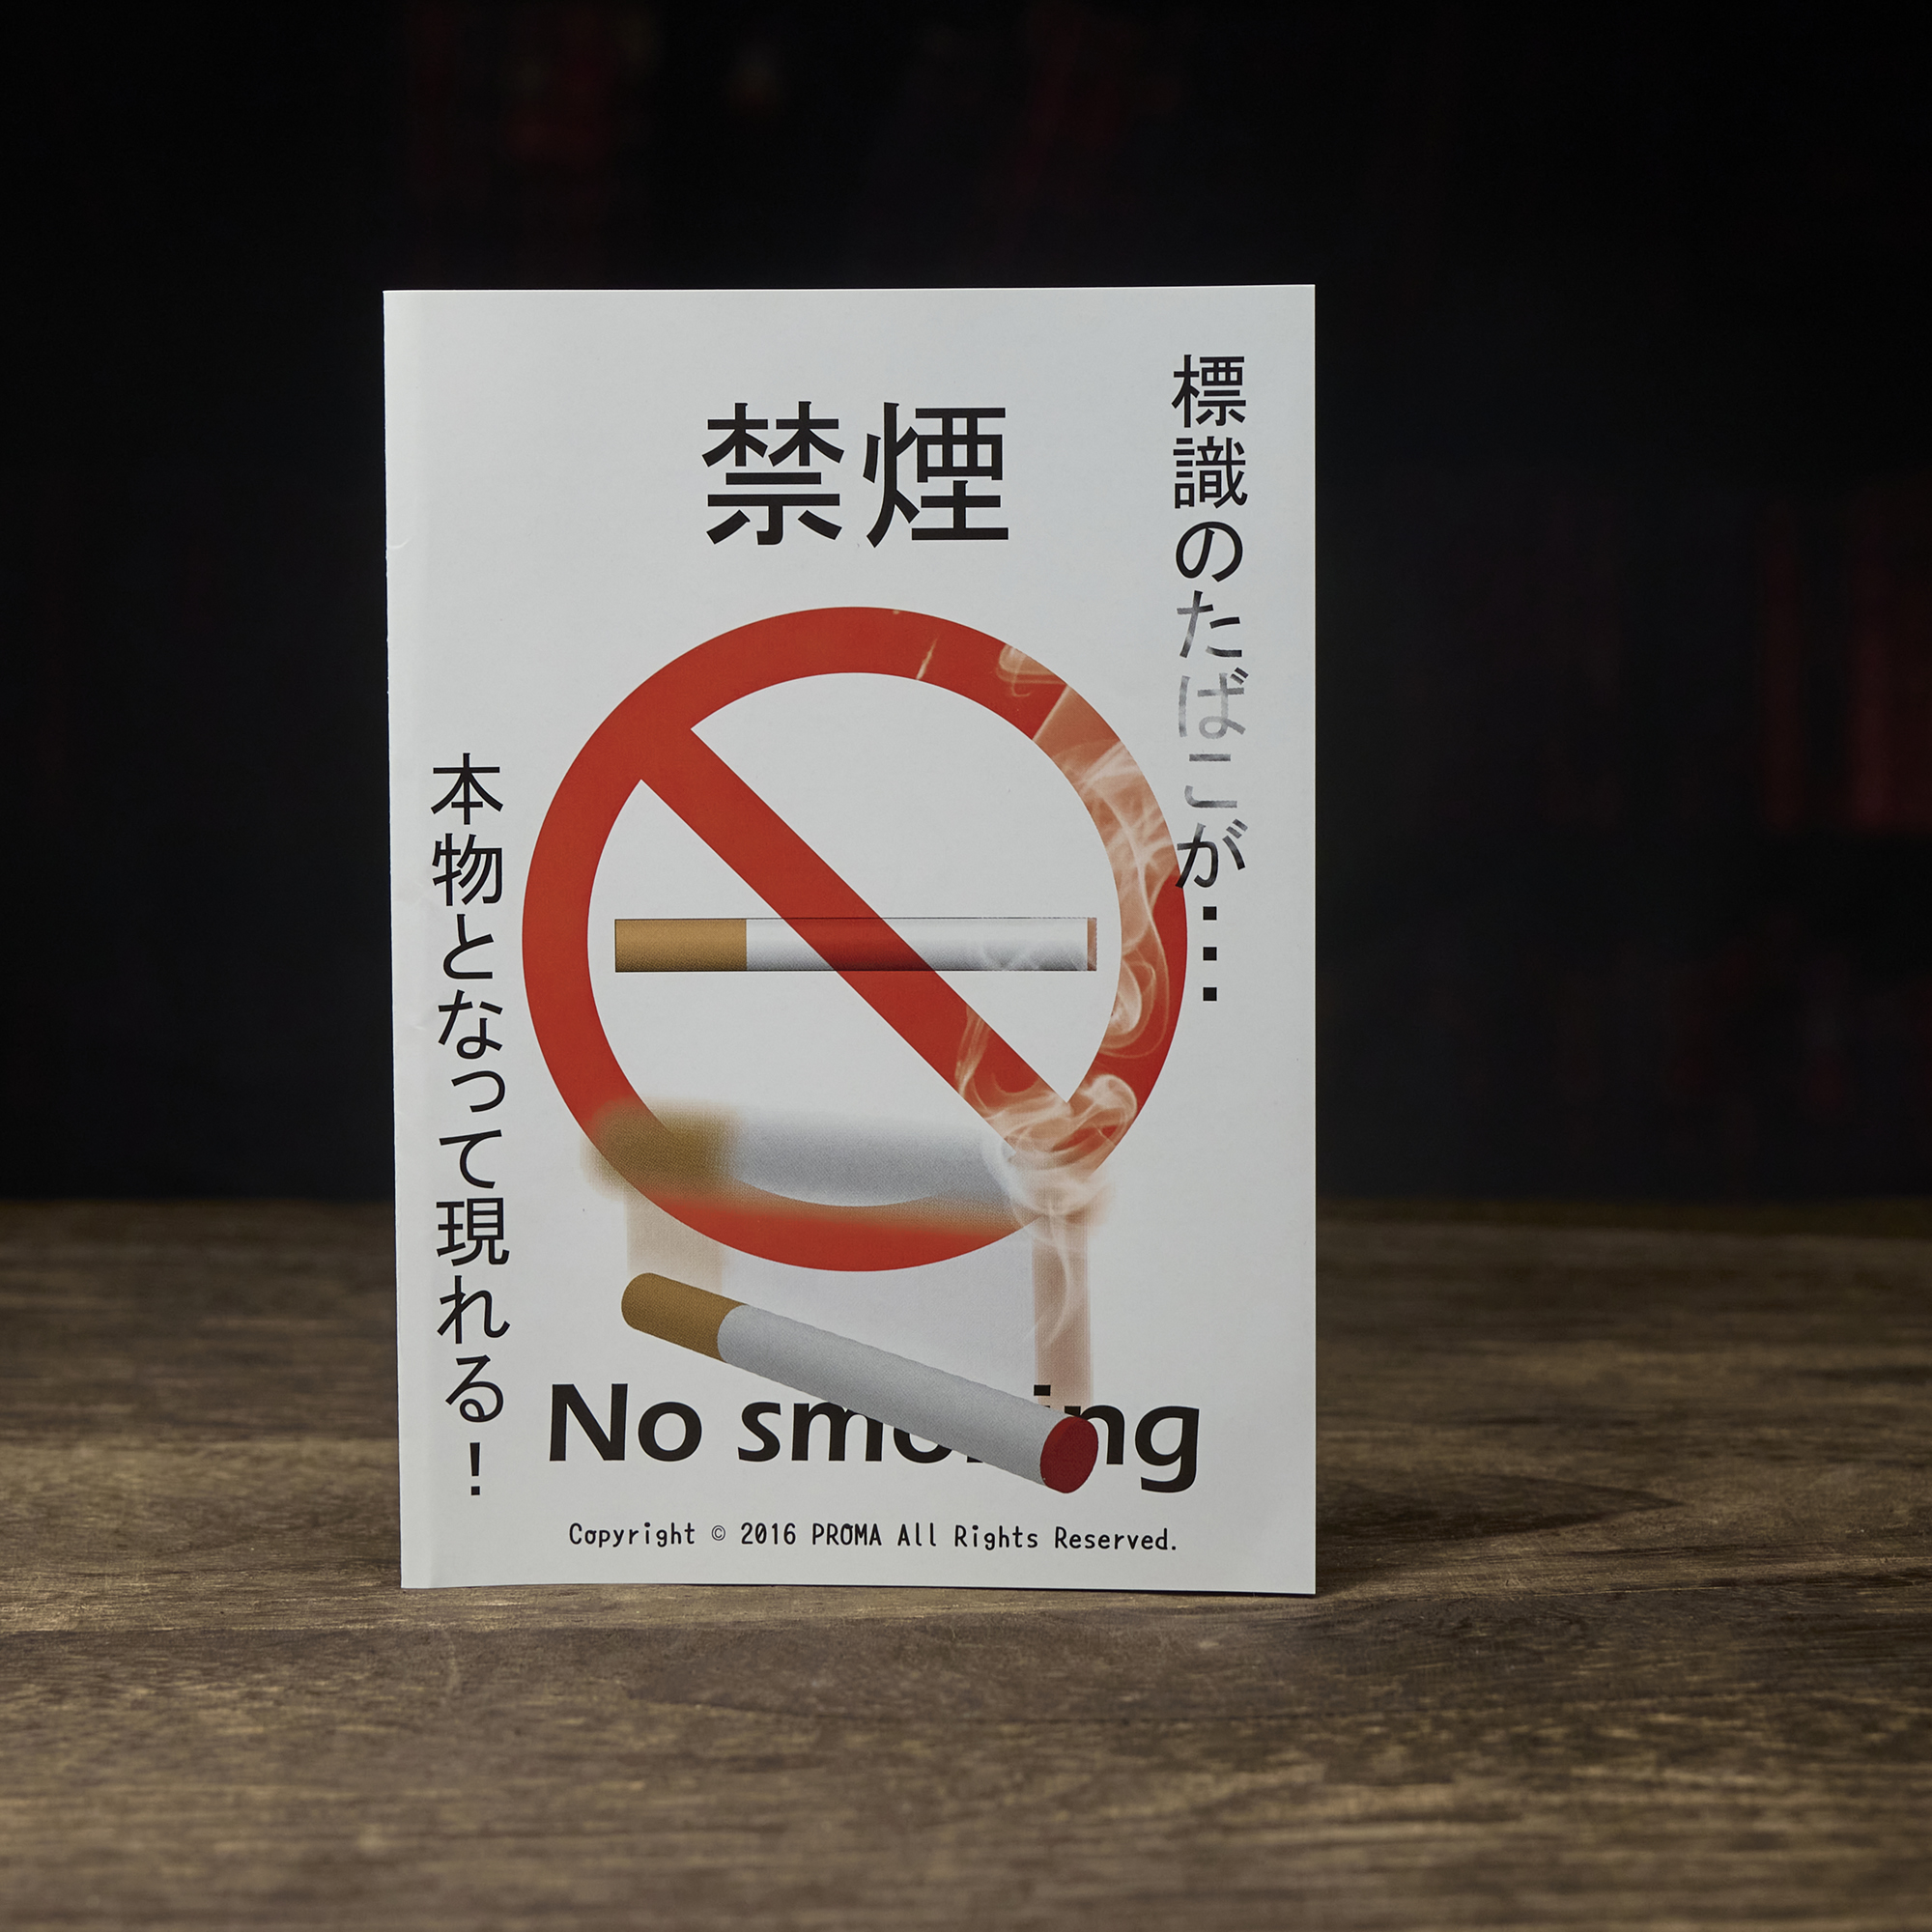 Pop Up Cigarette by Proma